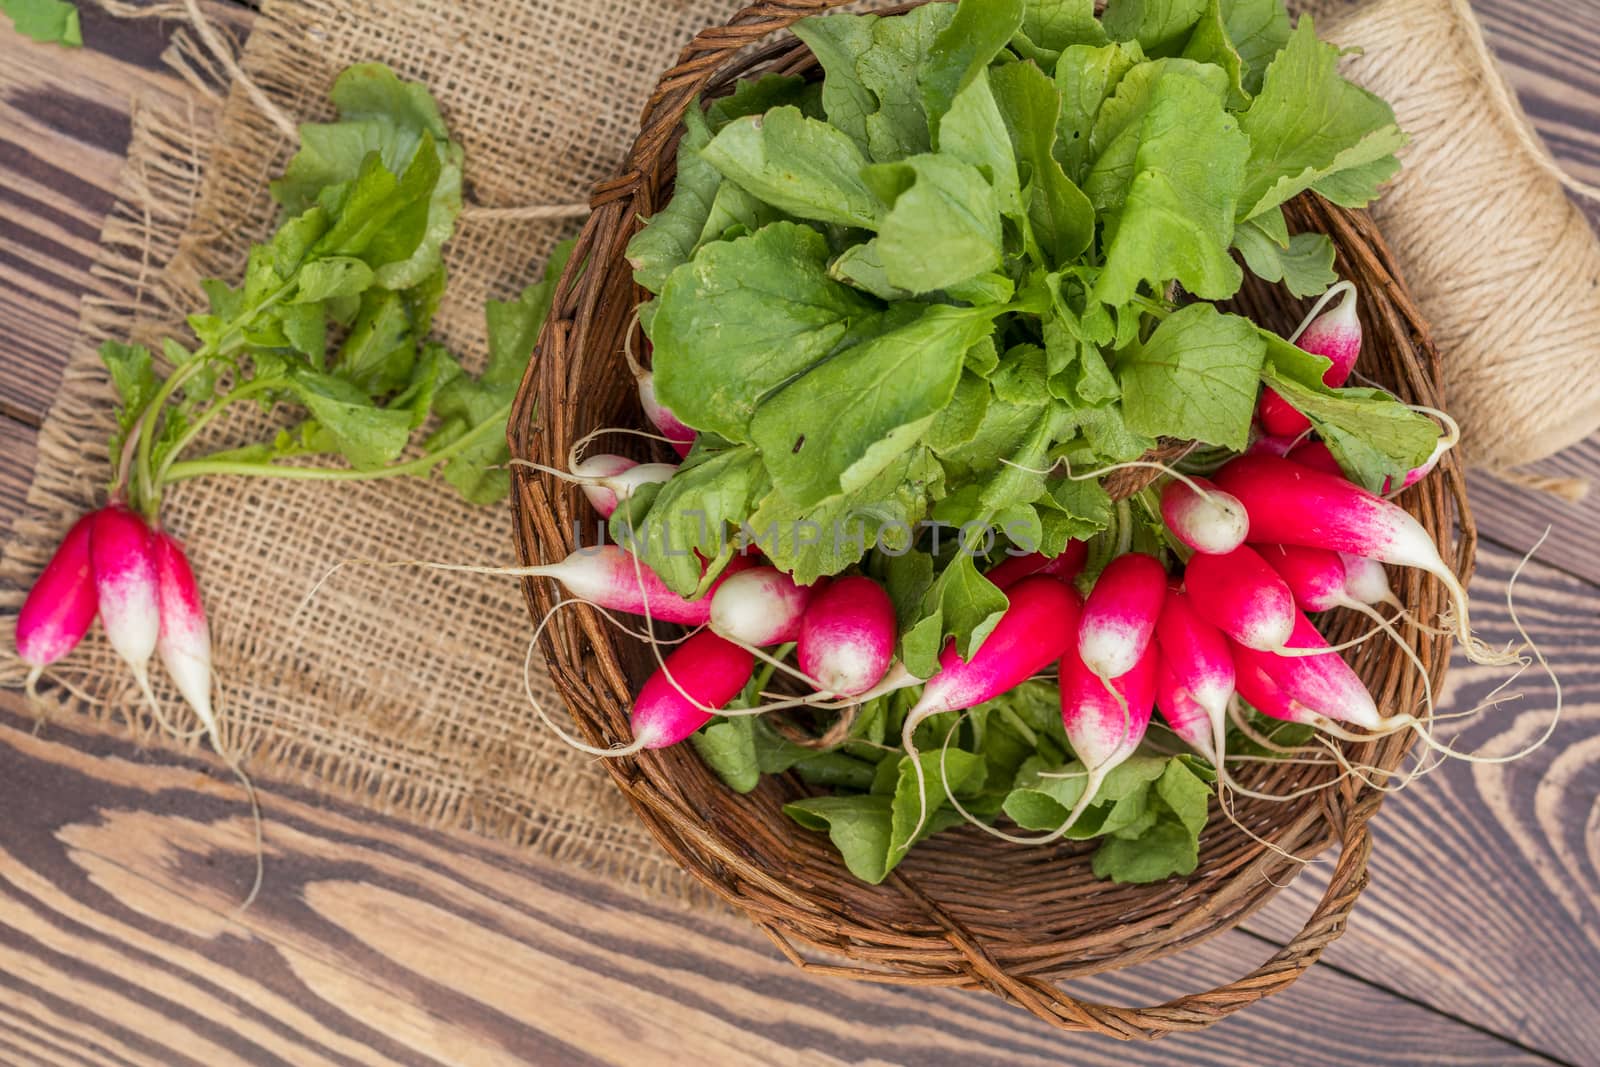 Bunch of fresh radishes in a wicker basket outdoors on the table. Top view